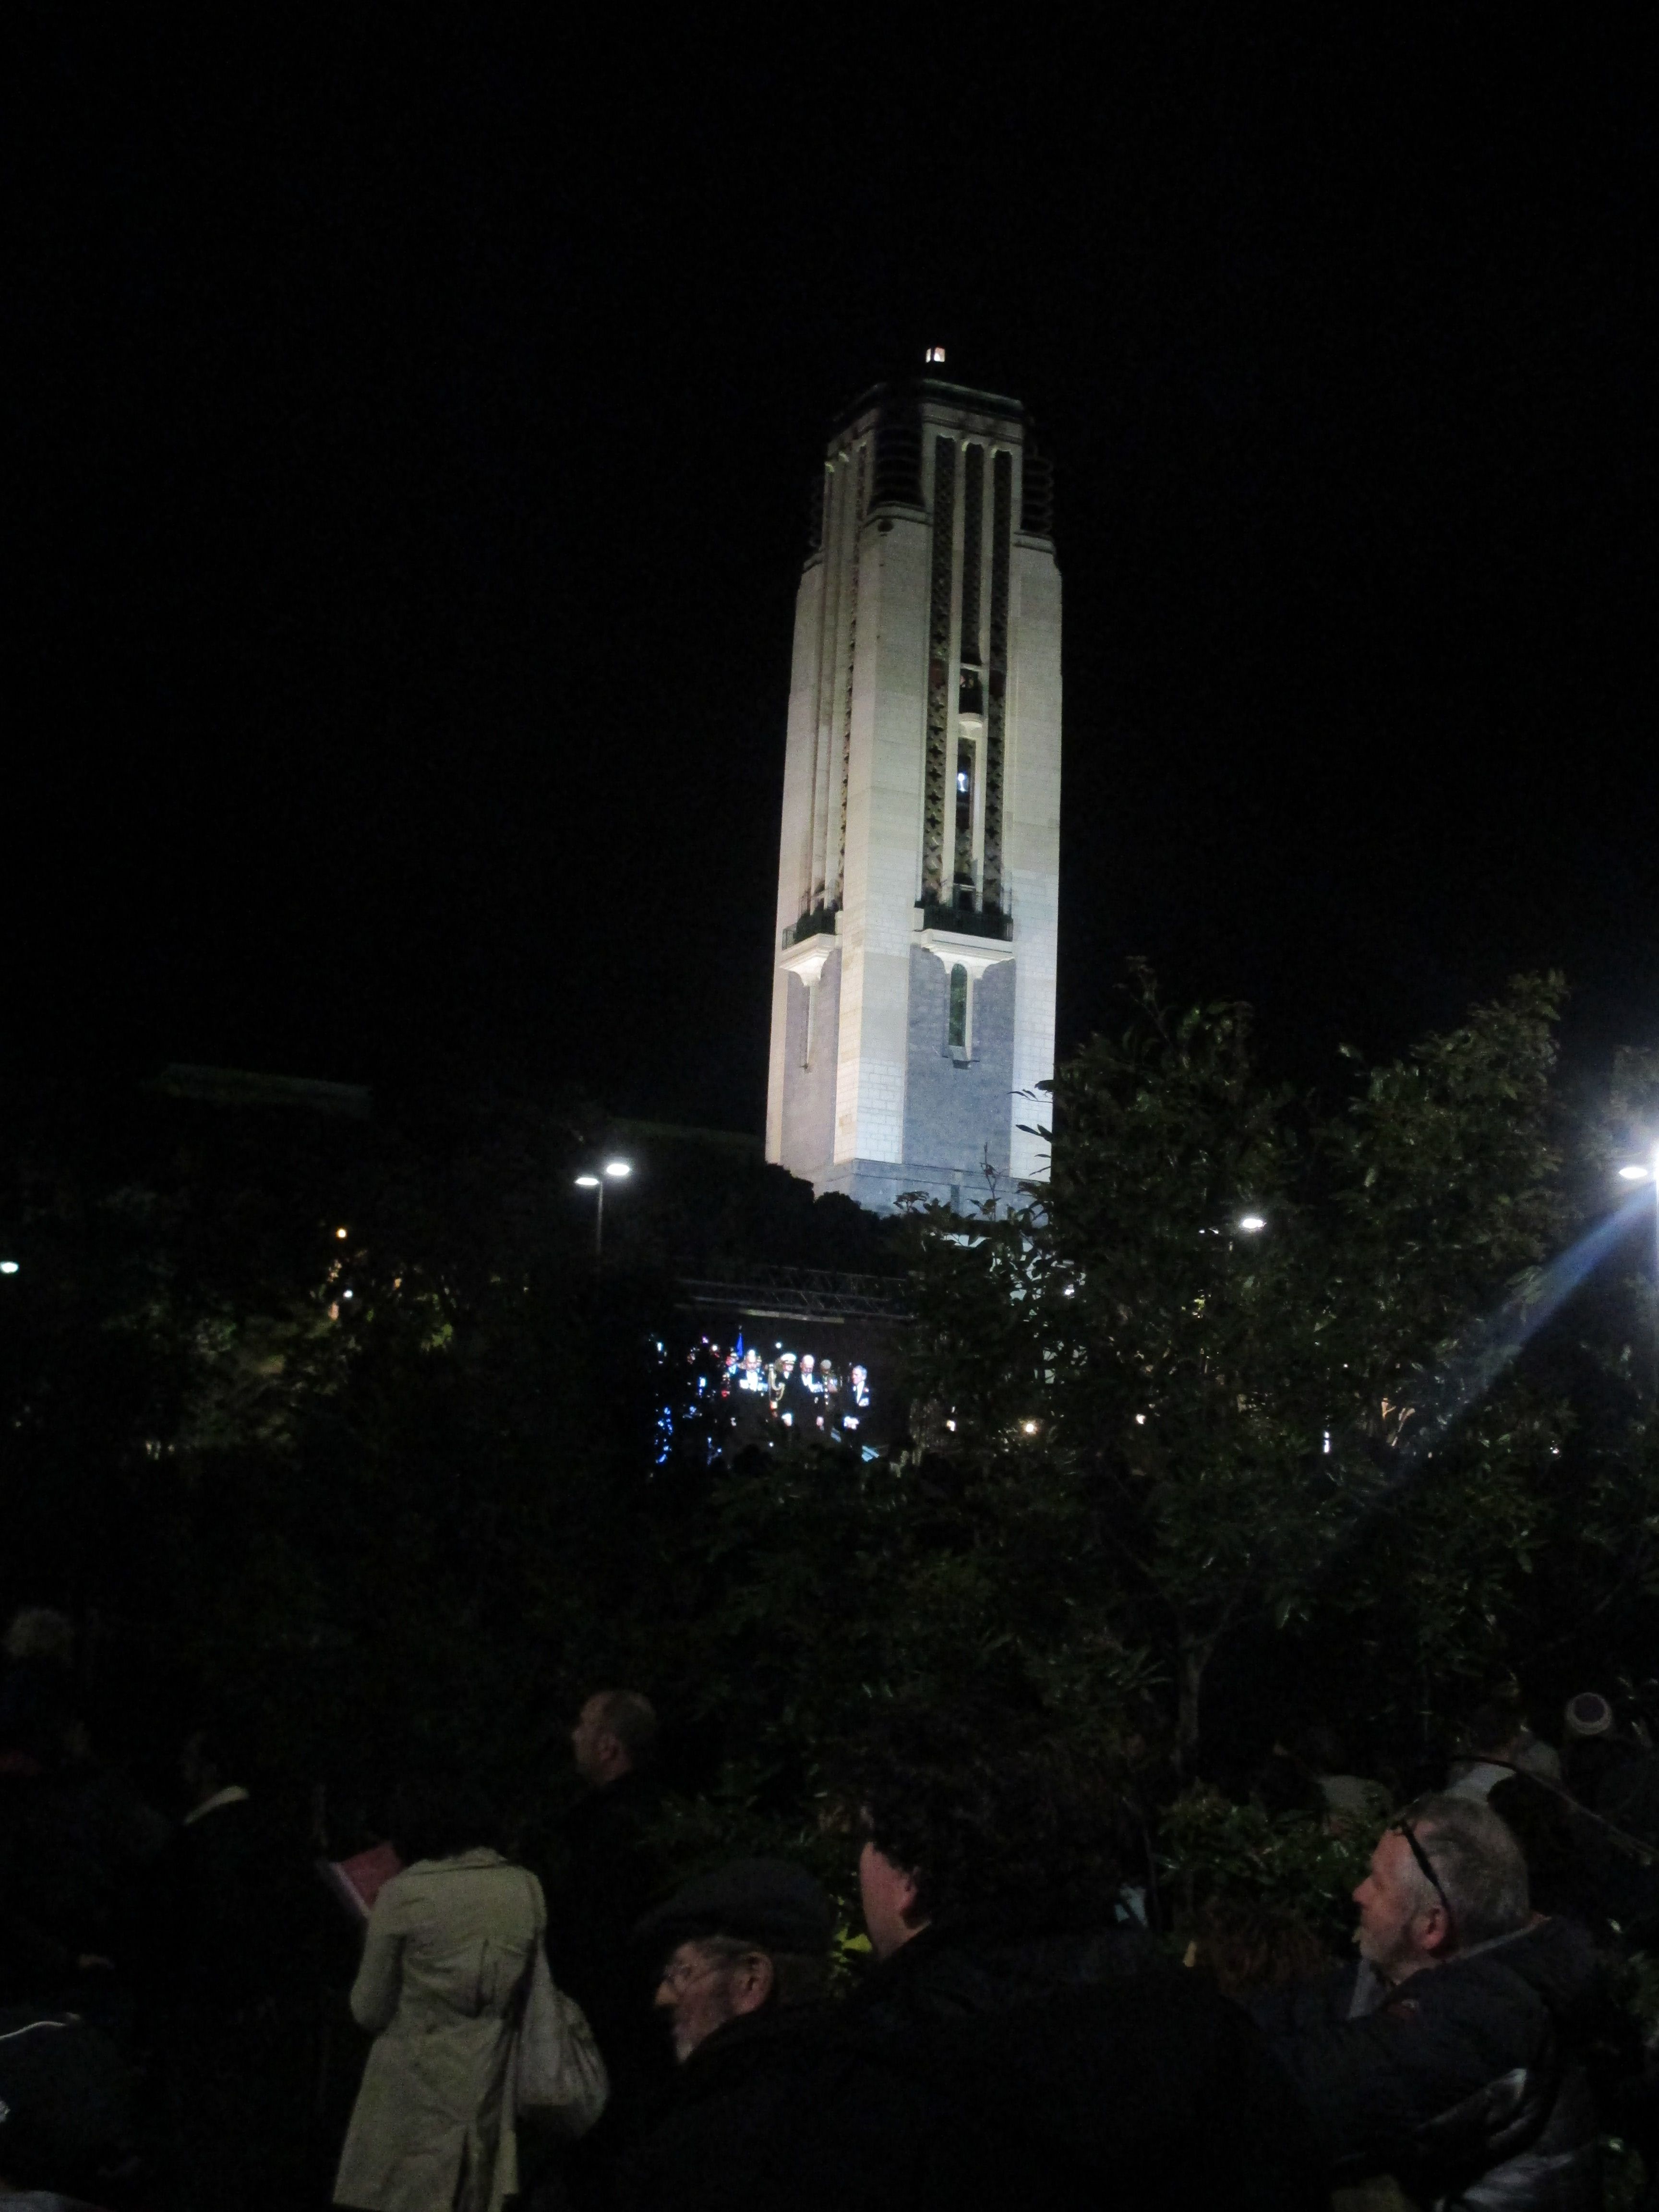 Anzac Day dawn service at the Pukeahu National War Memorial Park in Wellington, New Zealand, on April 25, 2015. This was the 100 year commemoration of the landings at Gallipoli.